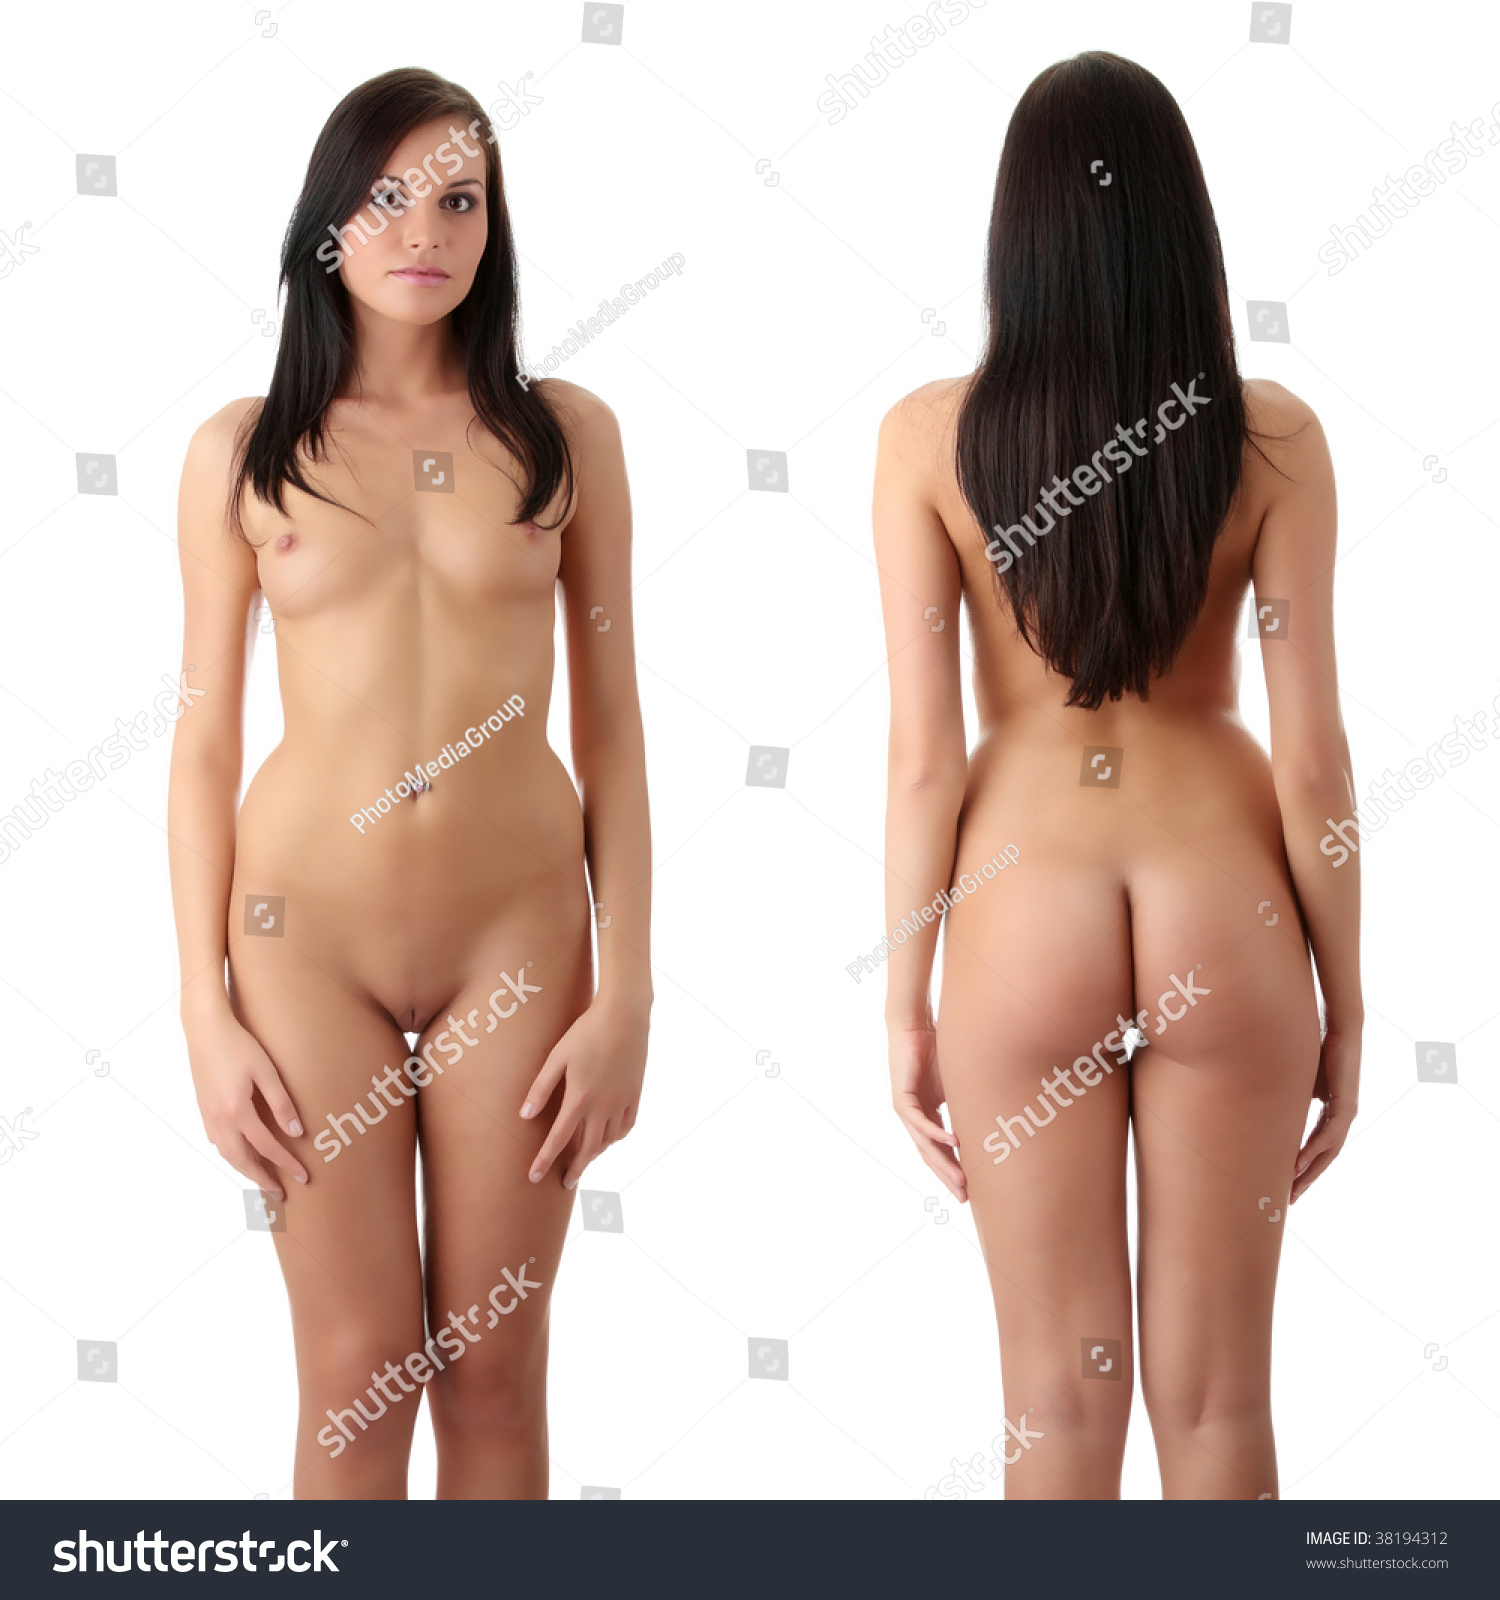 Nude Stock Images 23